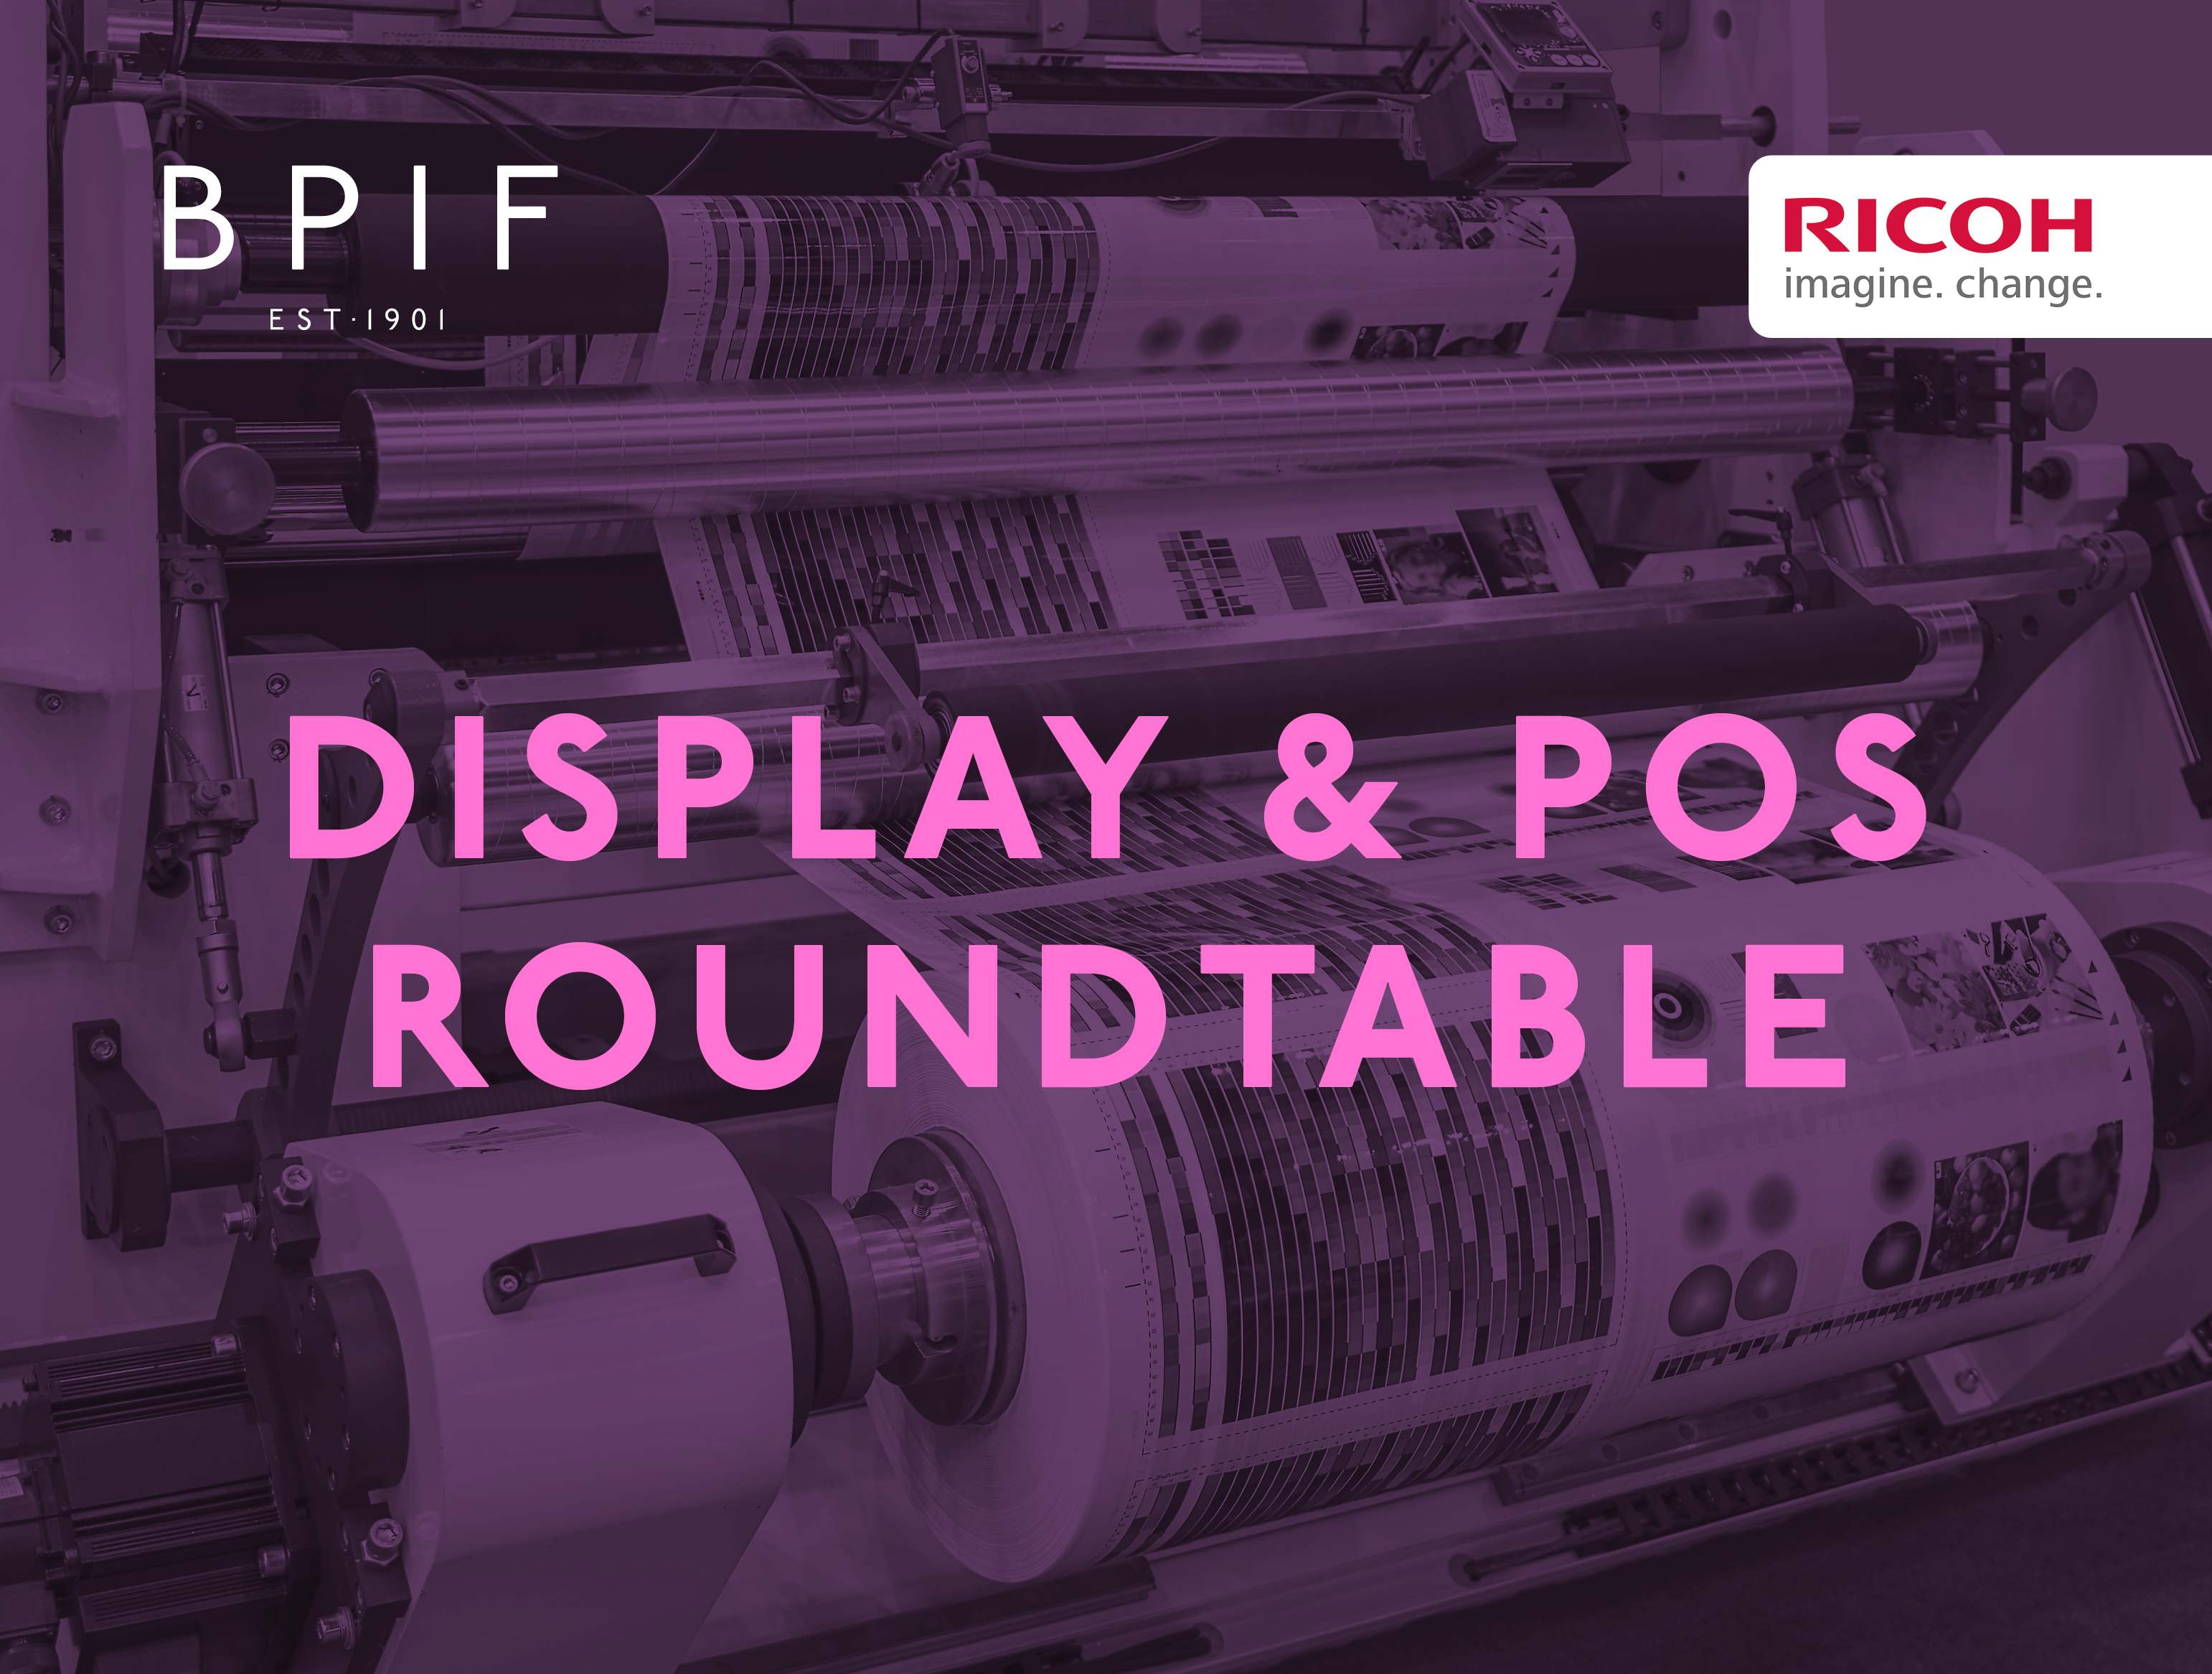 Display & POS – How do we make an impact in retail?